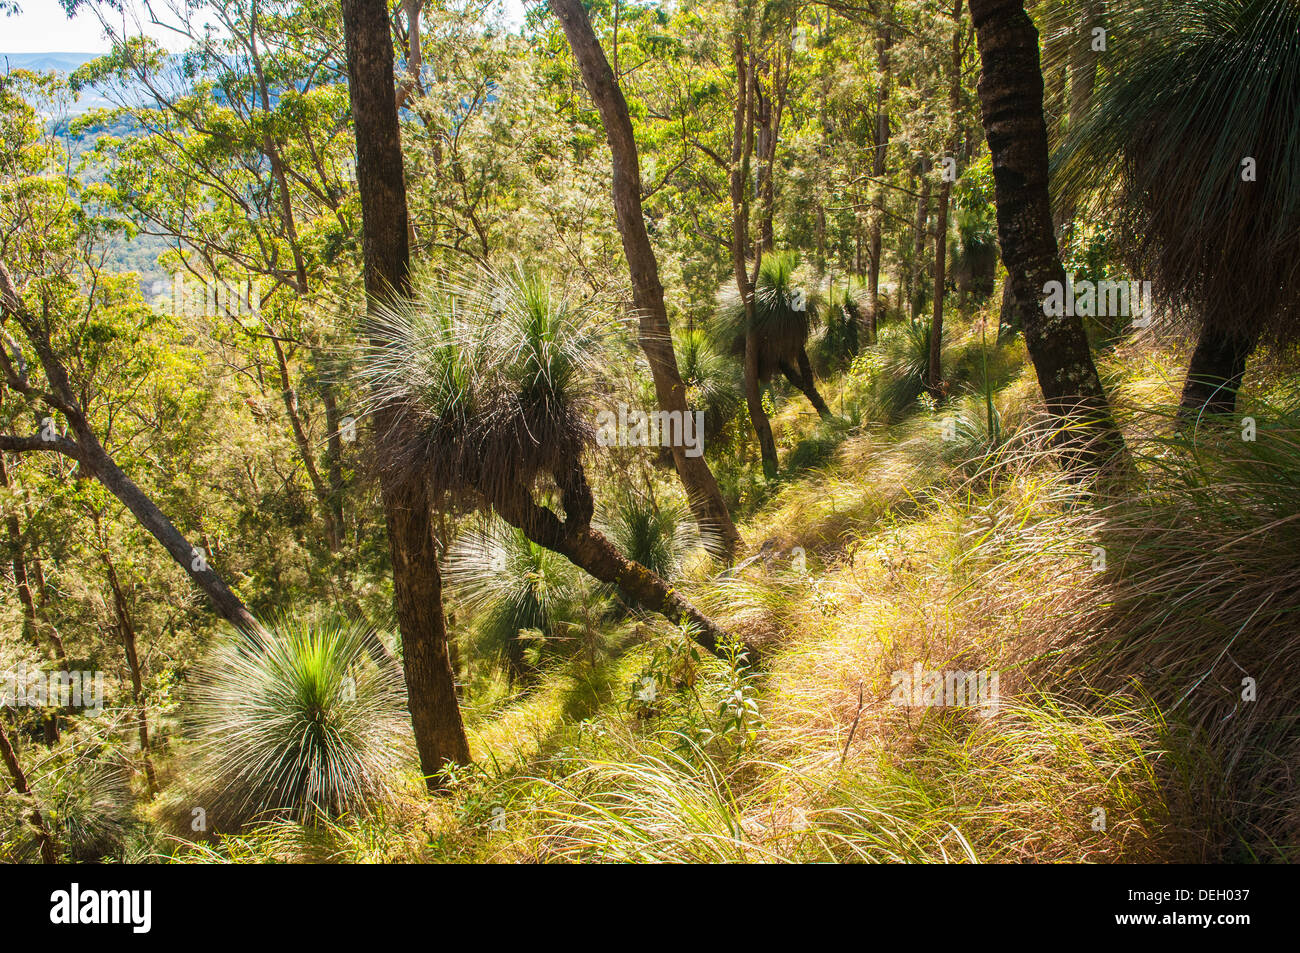 Grass trees on the slopes of Mt. Mitchell, Main Range National Park, Queensland, Australia Stock Photo